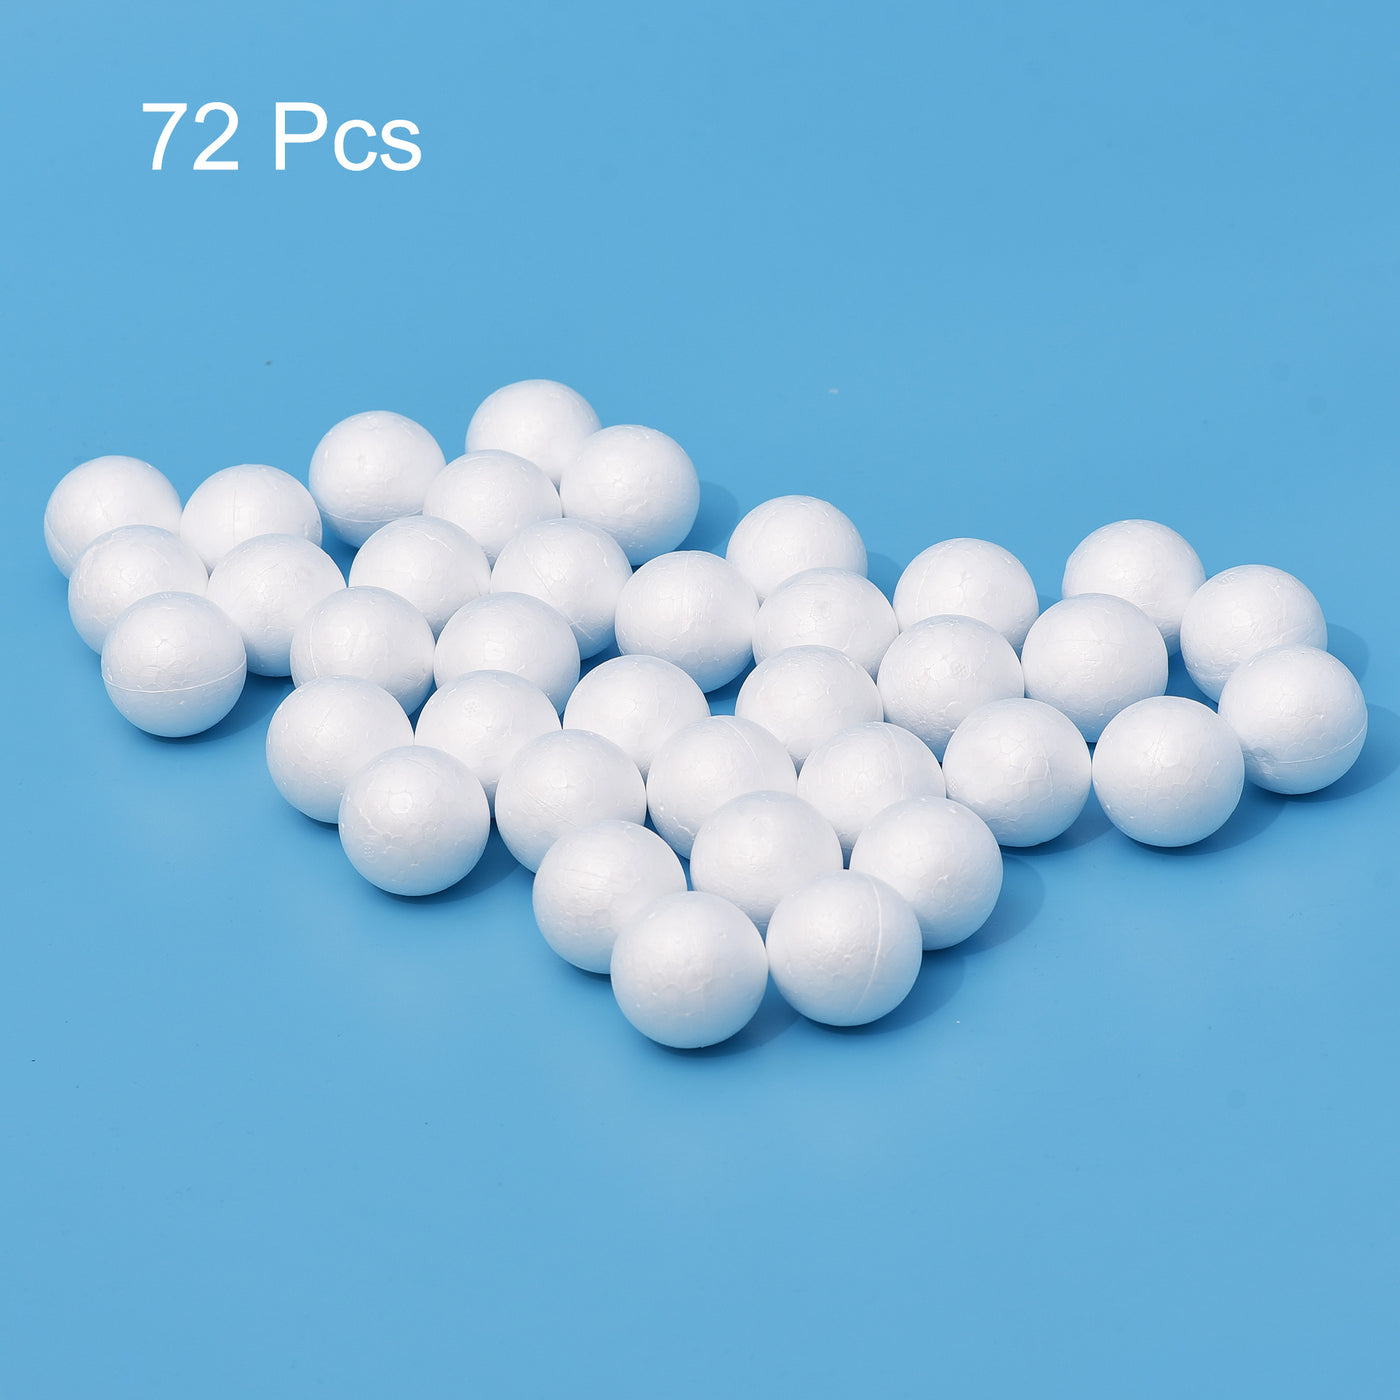 Uxcell Uxcell 72Pcs 1.65" White Polystyrene Foam Solid Balls for Crafts and Party Decorations